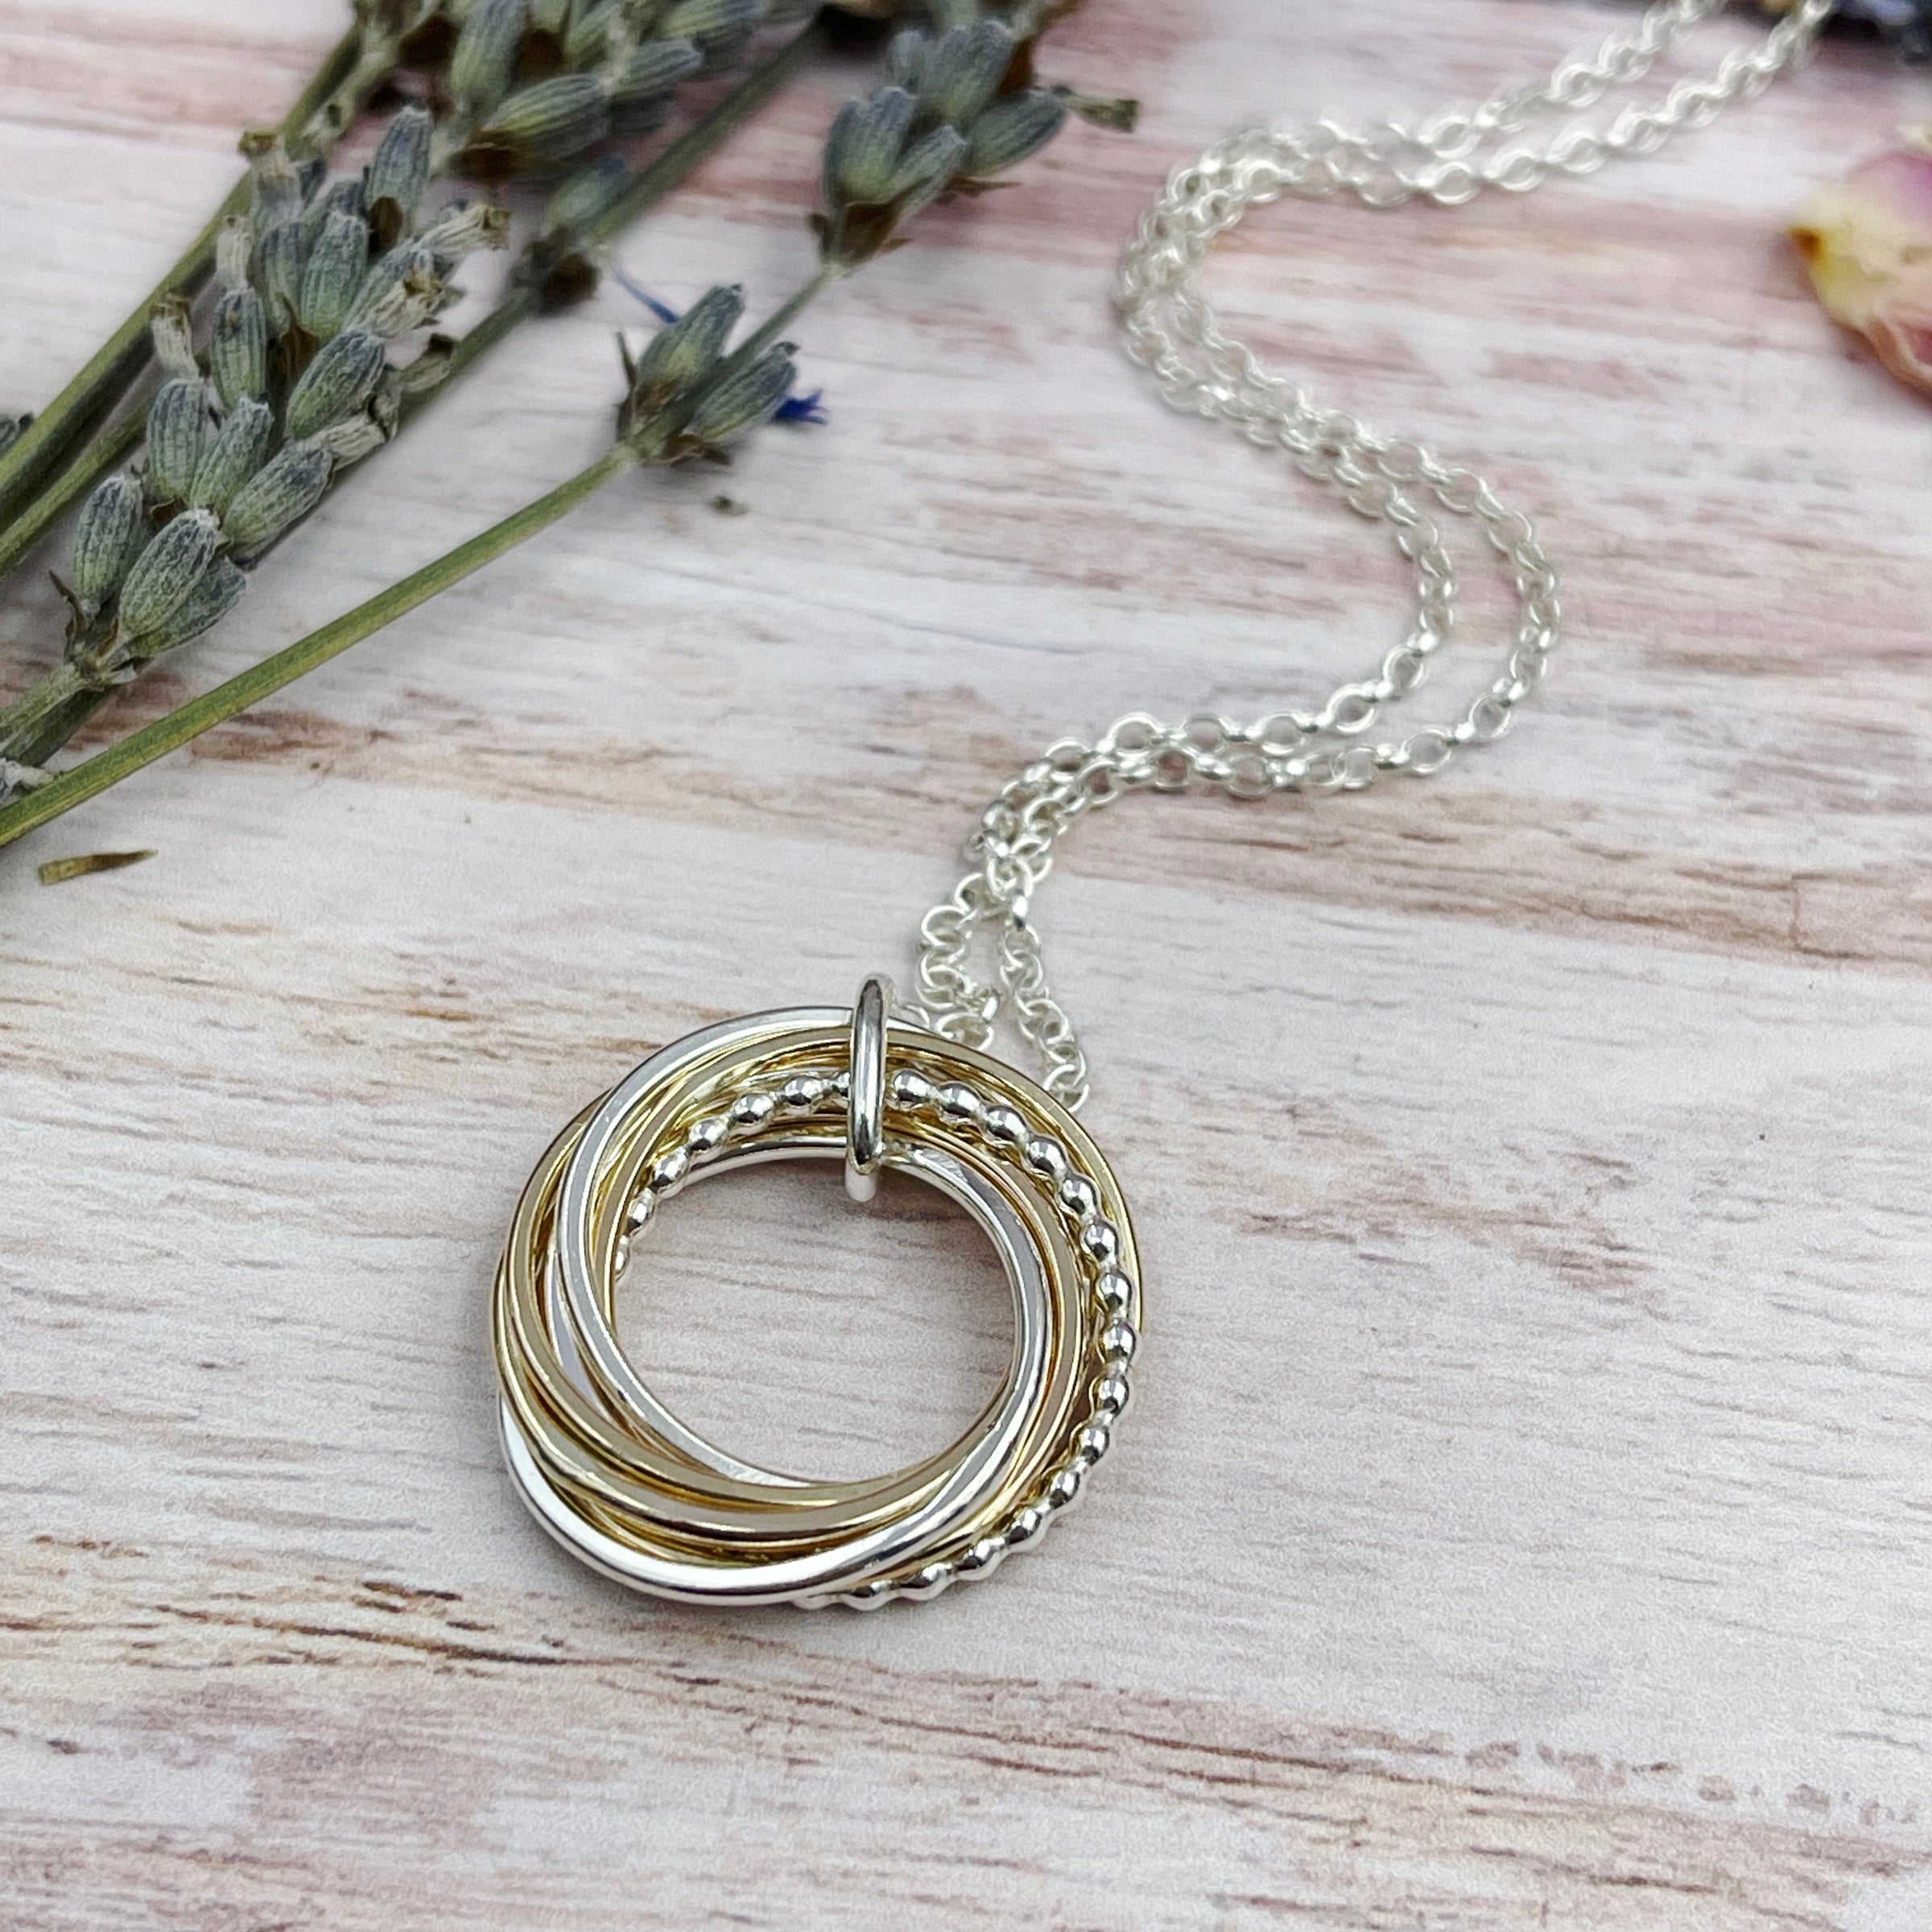 Seven Ring 70th Birthday Necklace Gift By Yatris | notonthehighstreet.com